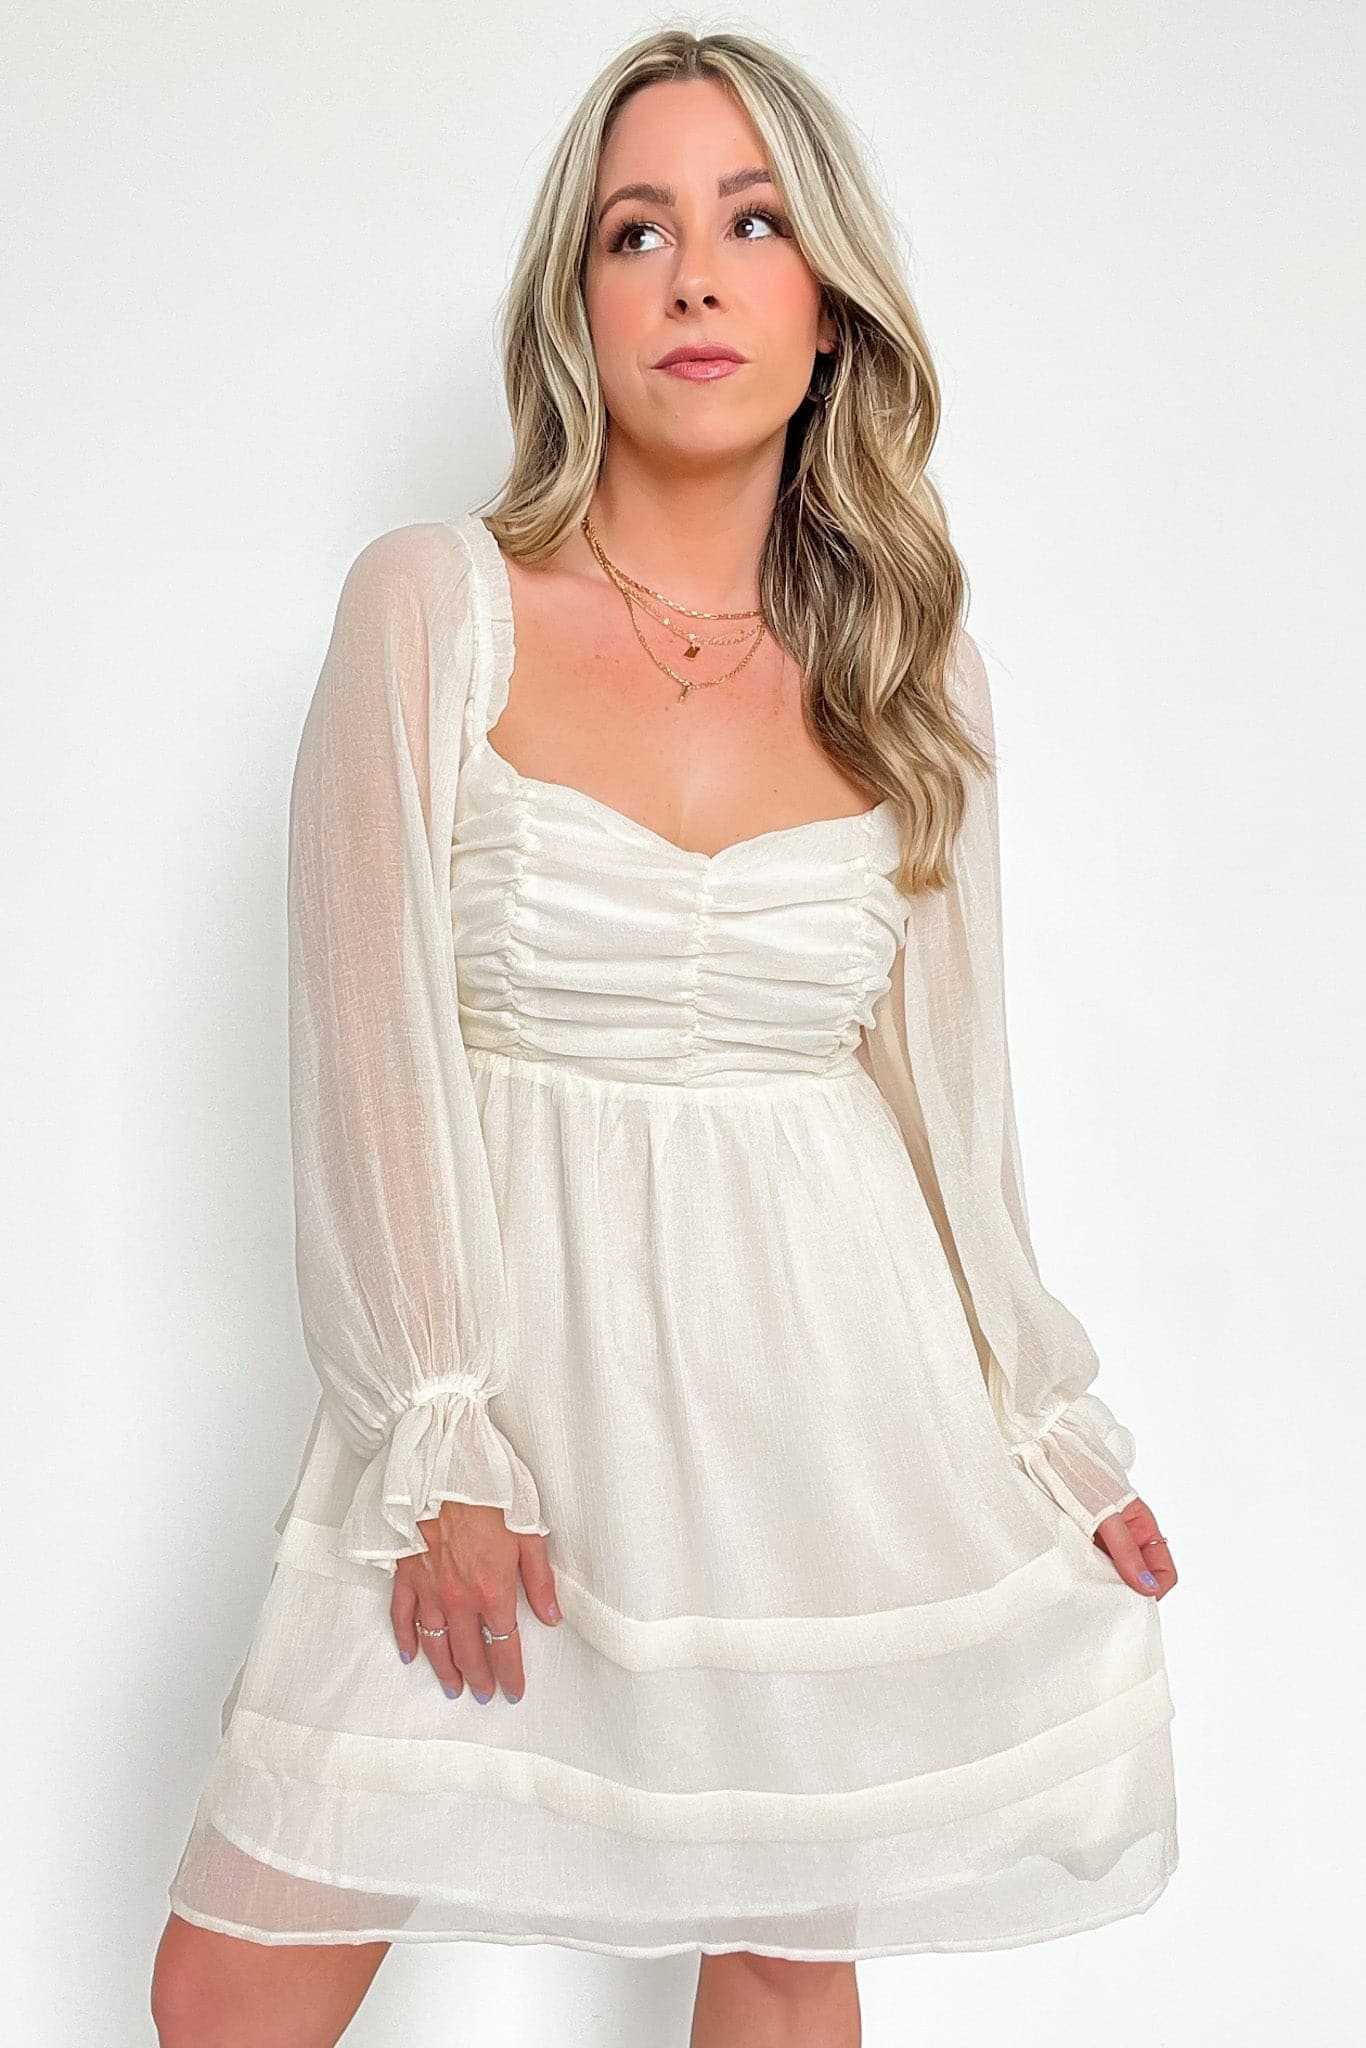  Sensational Promise Ruched Tiered Dress - FINAL SALE - Madison and Mallory